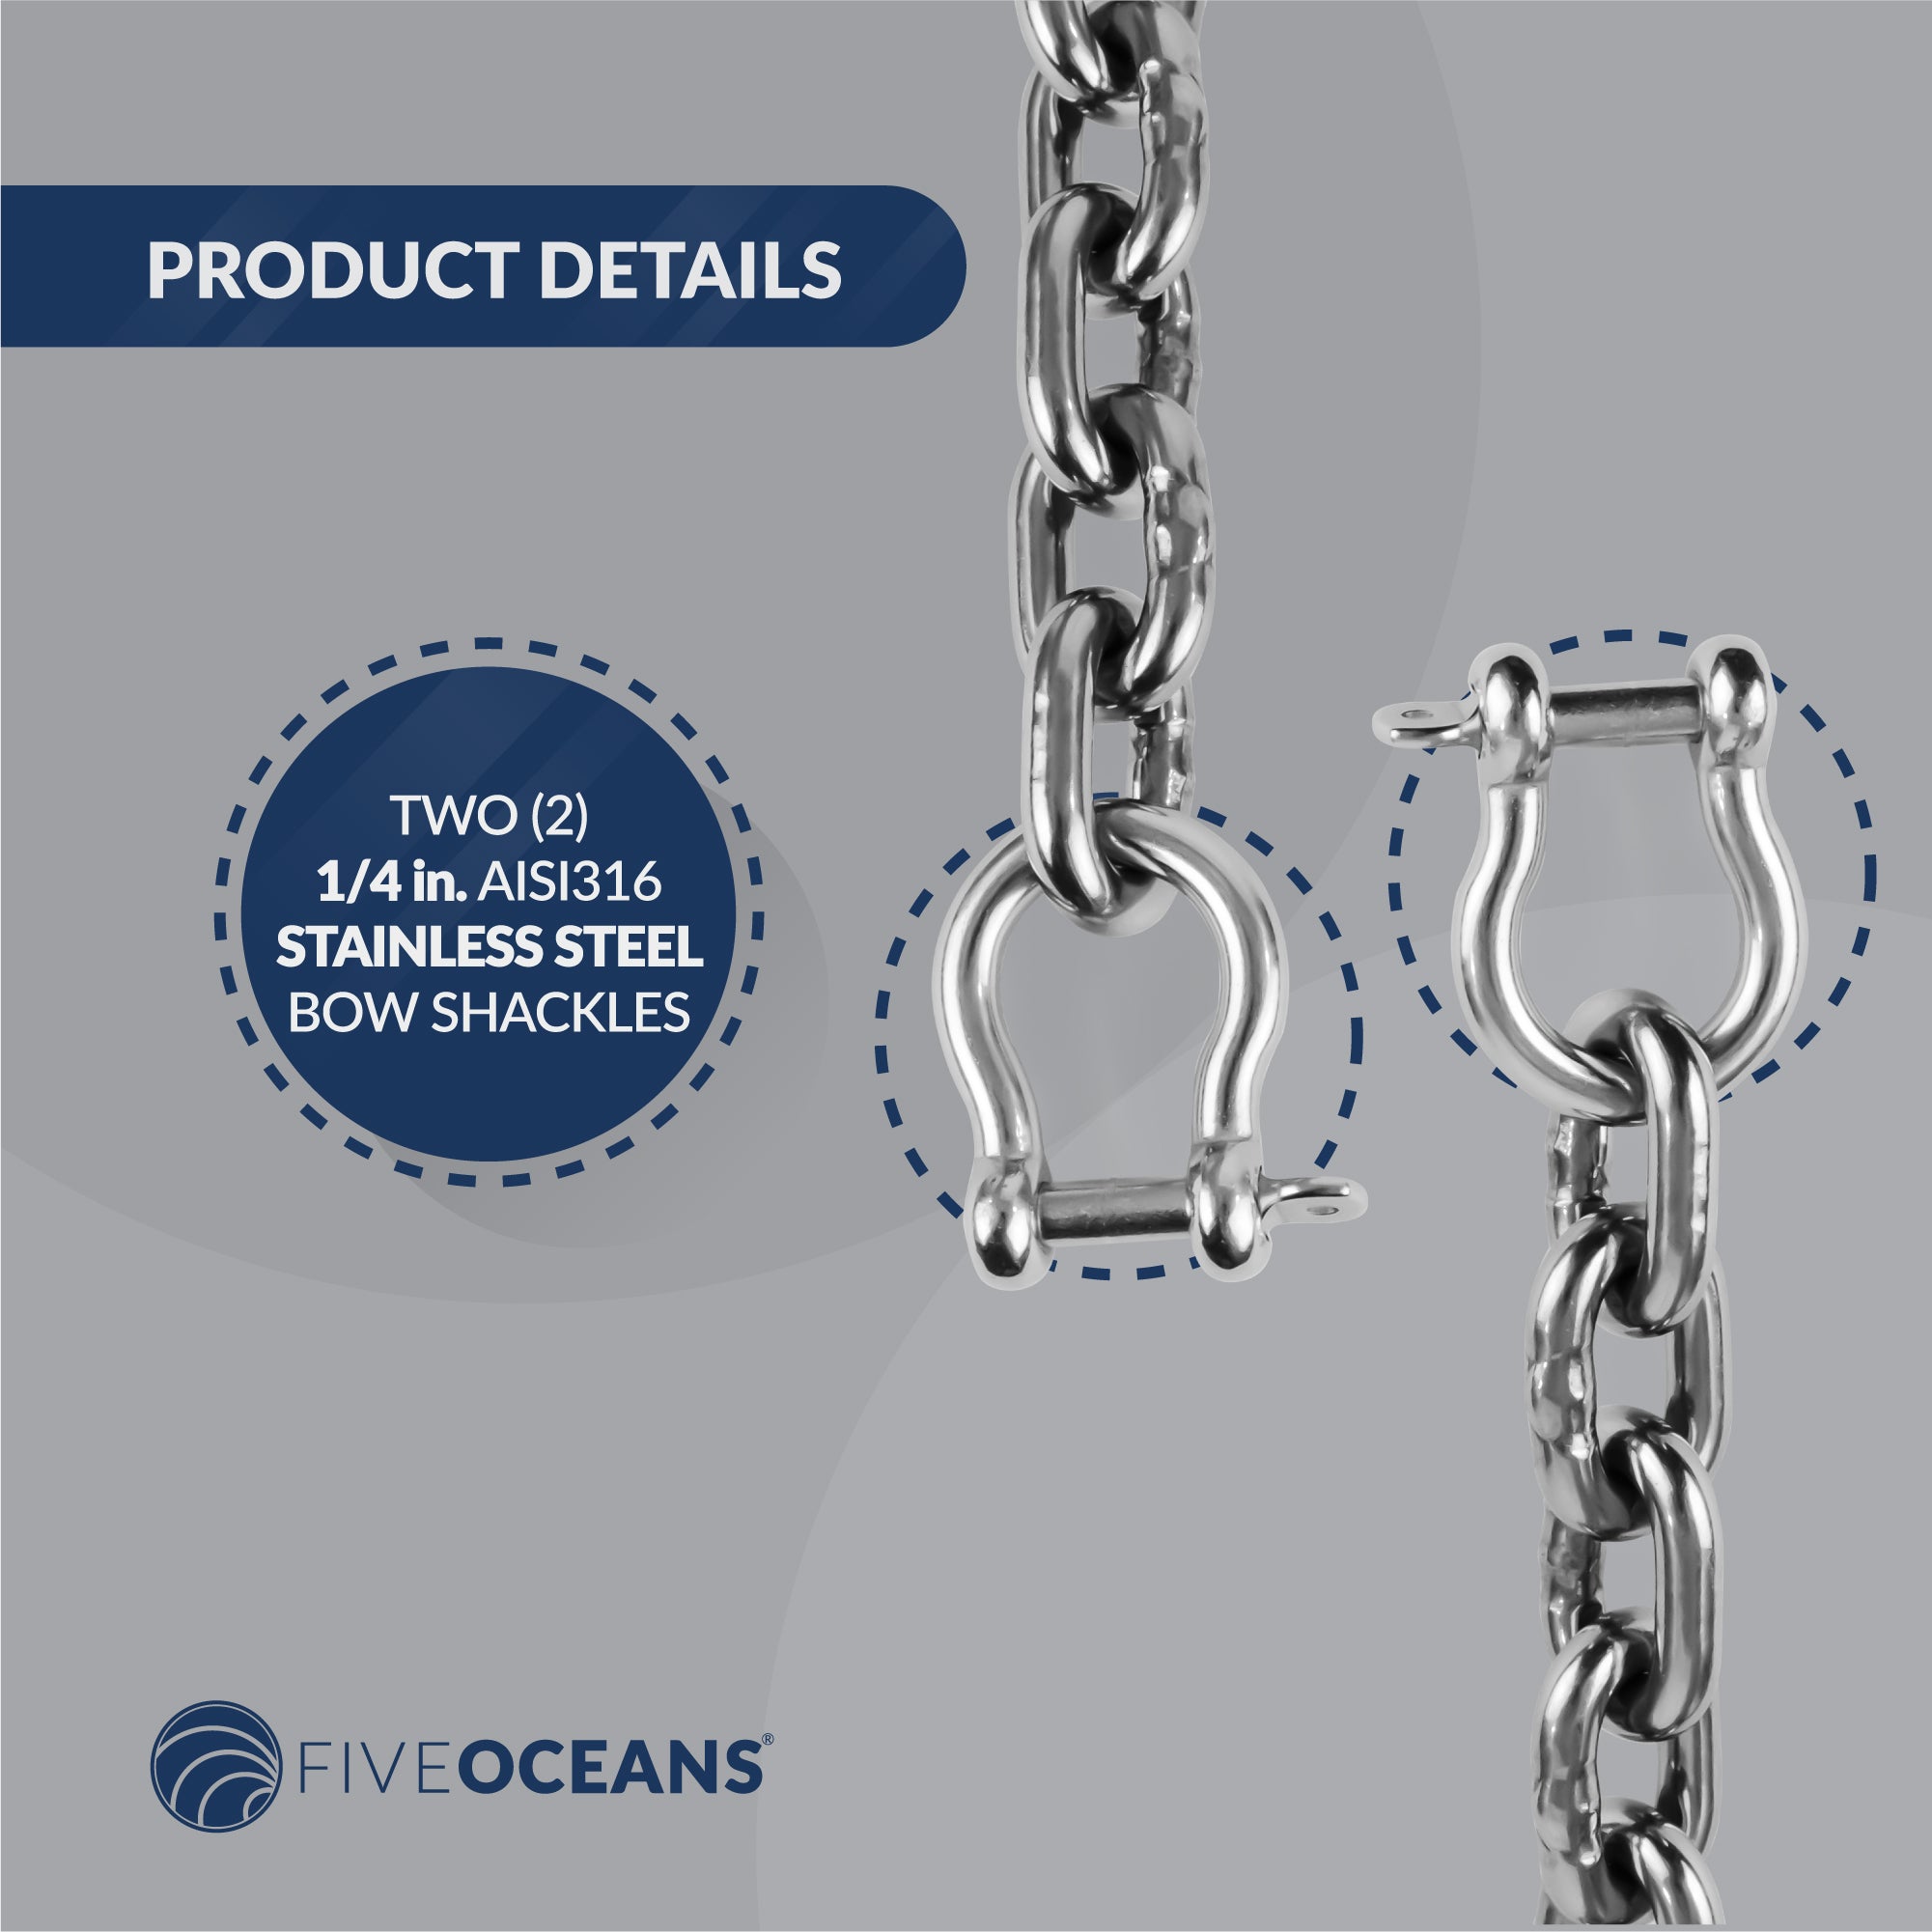 Anchor Lead Chain 1/4" x 10', HTG4 Stainless Steel - FO4492-S10